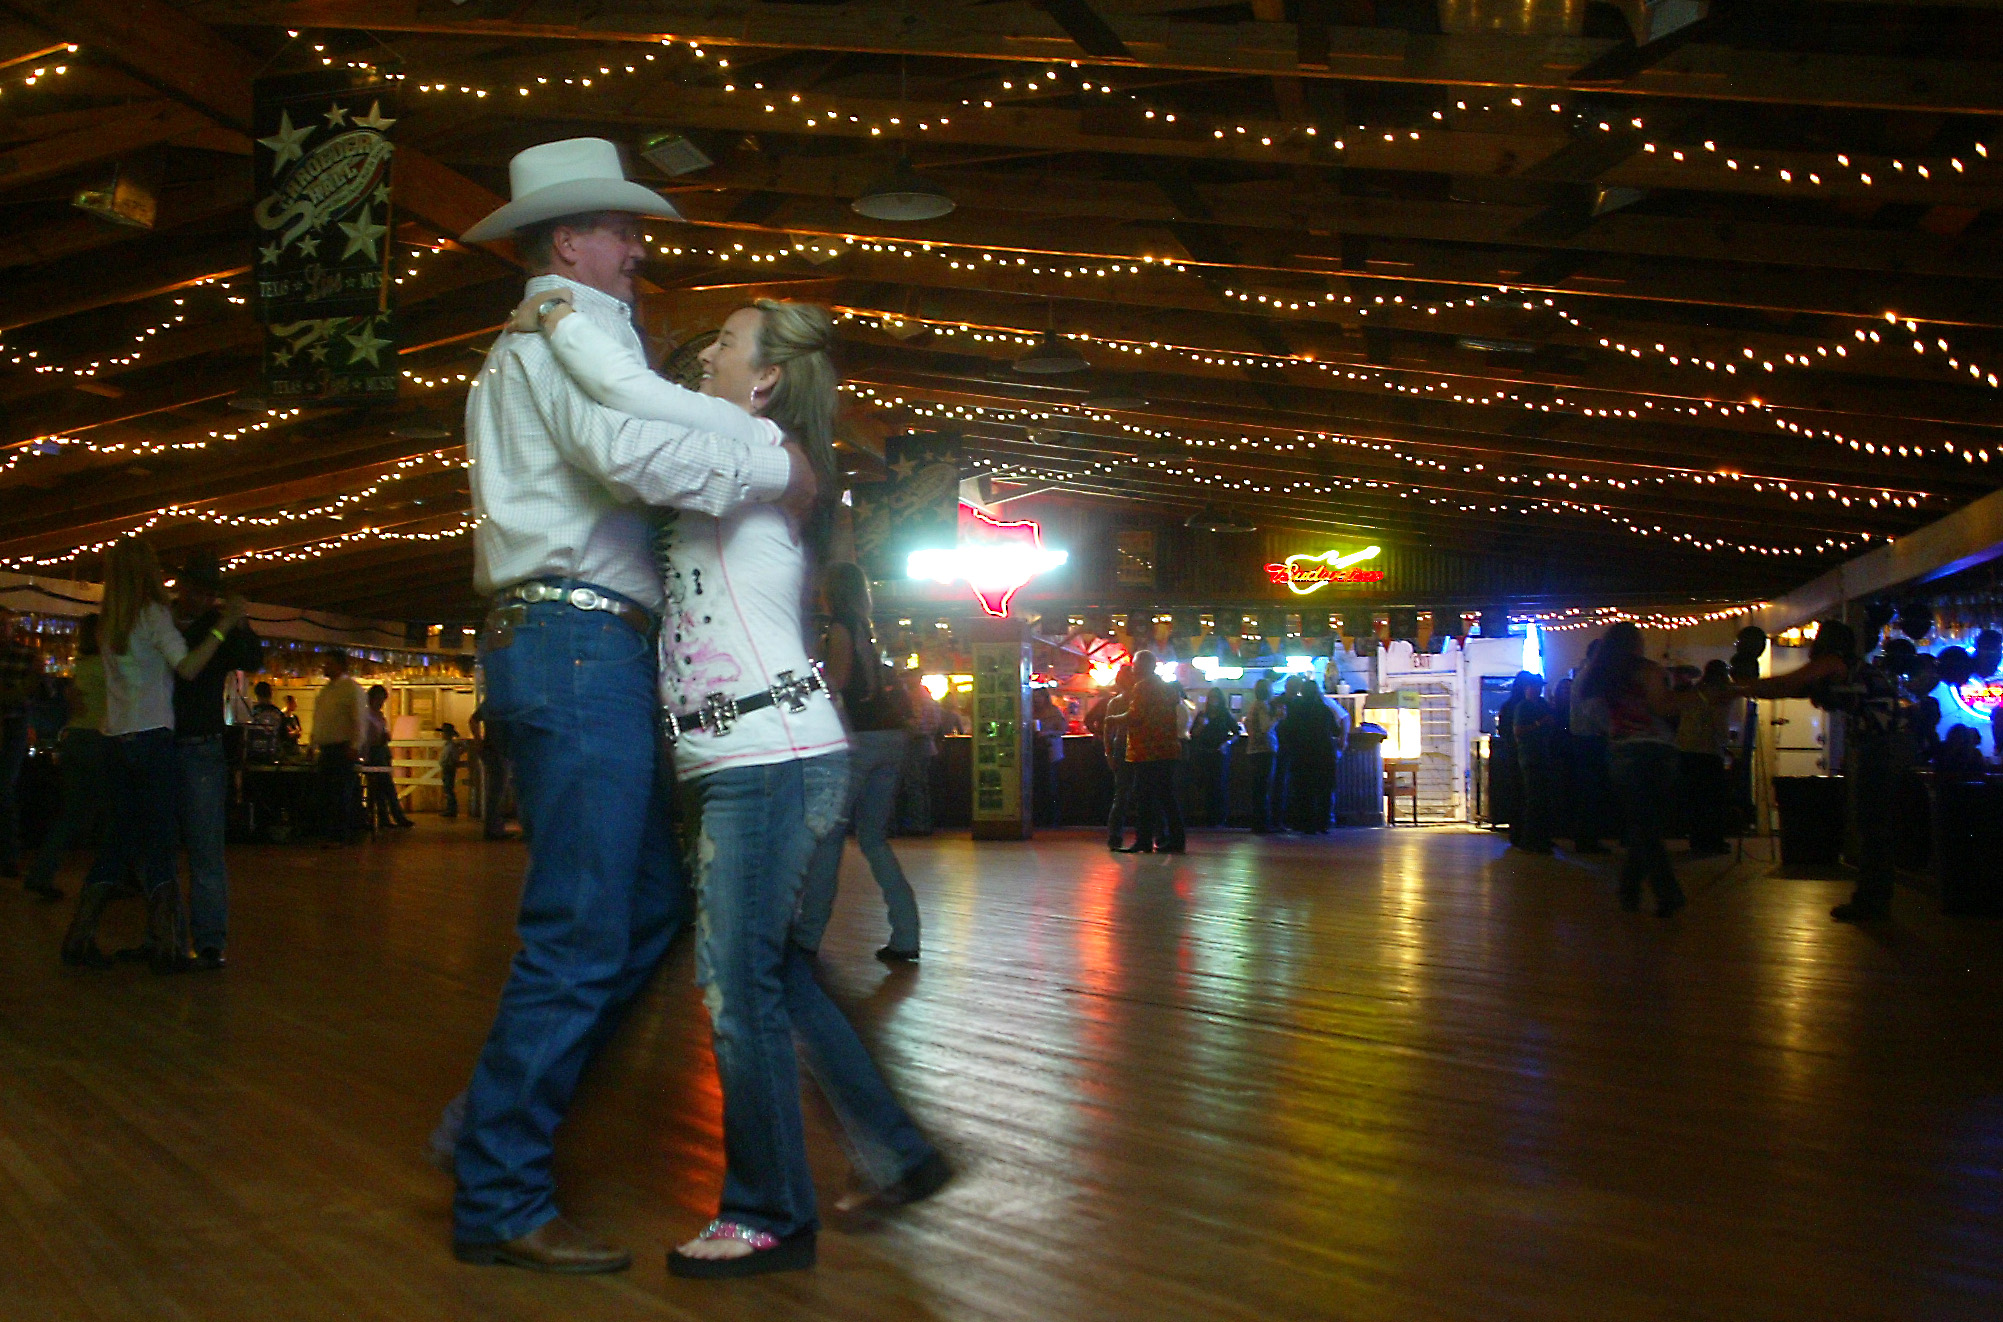 Dancing through history: a guide to historic Texas dance halls